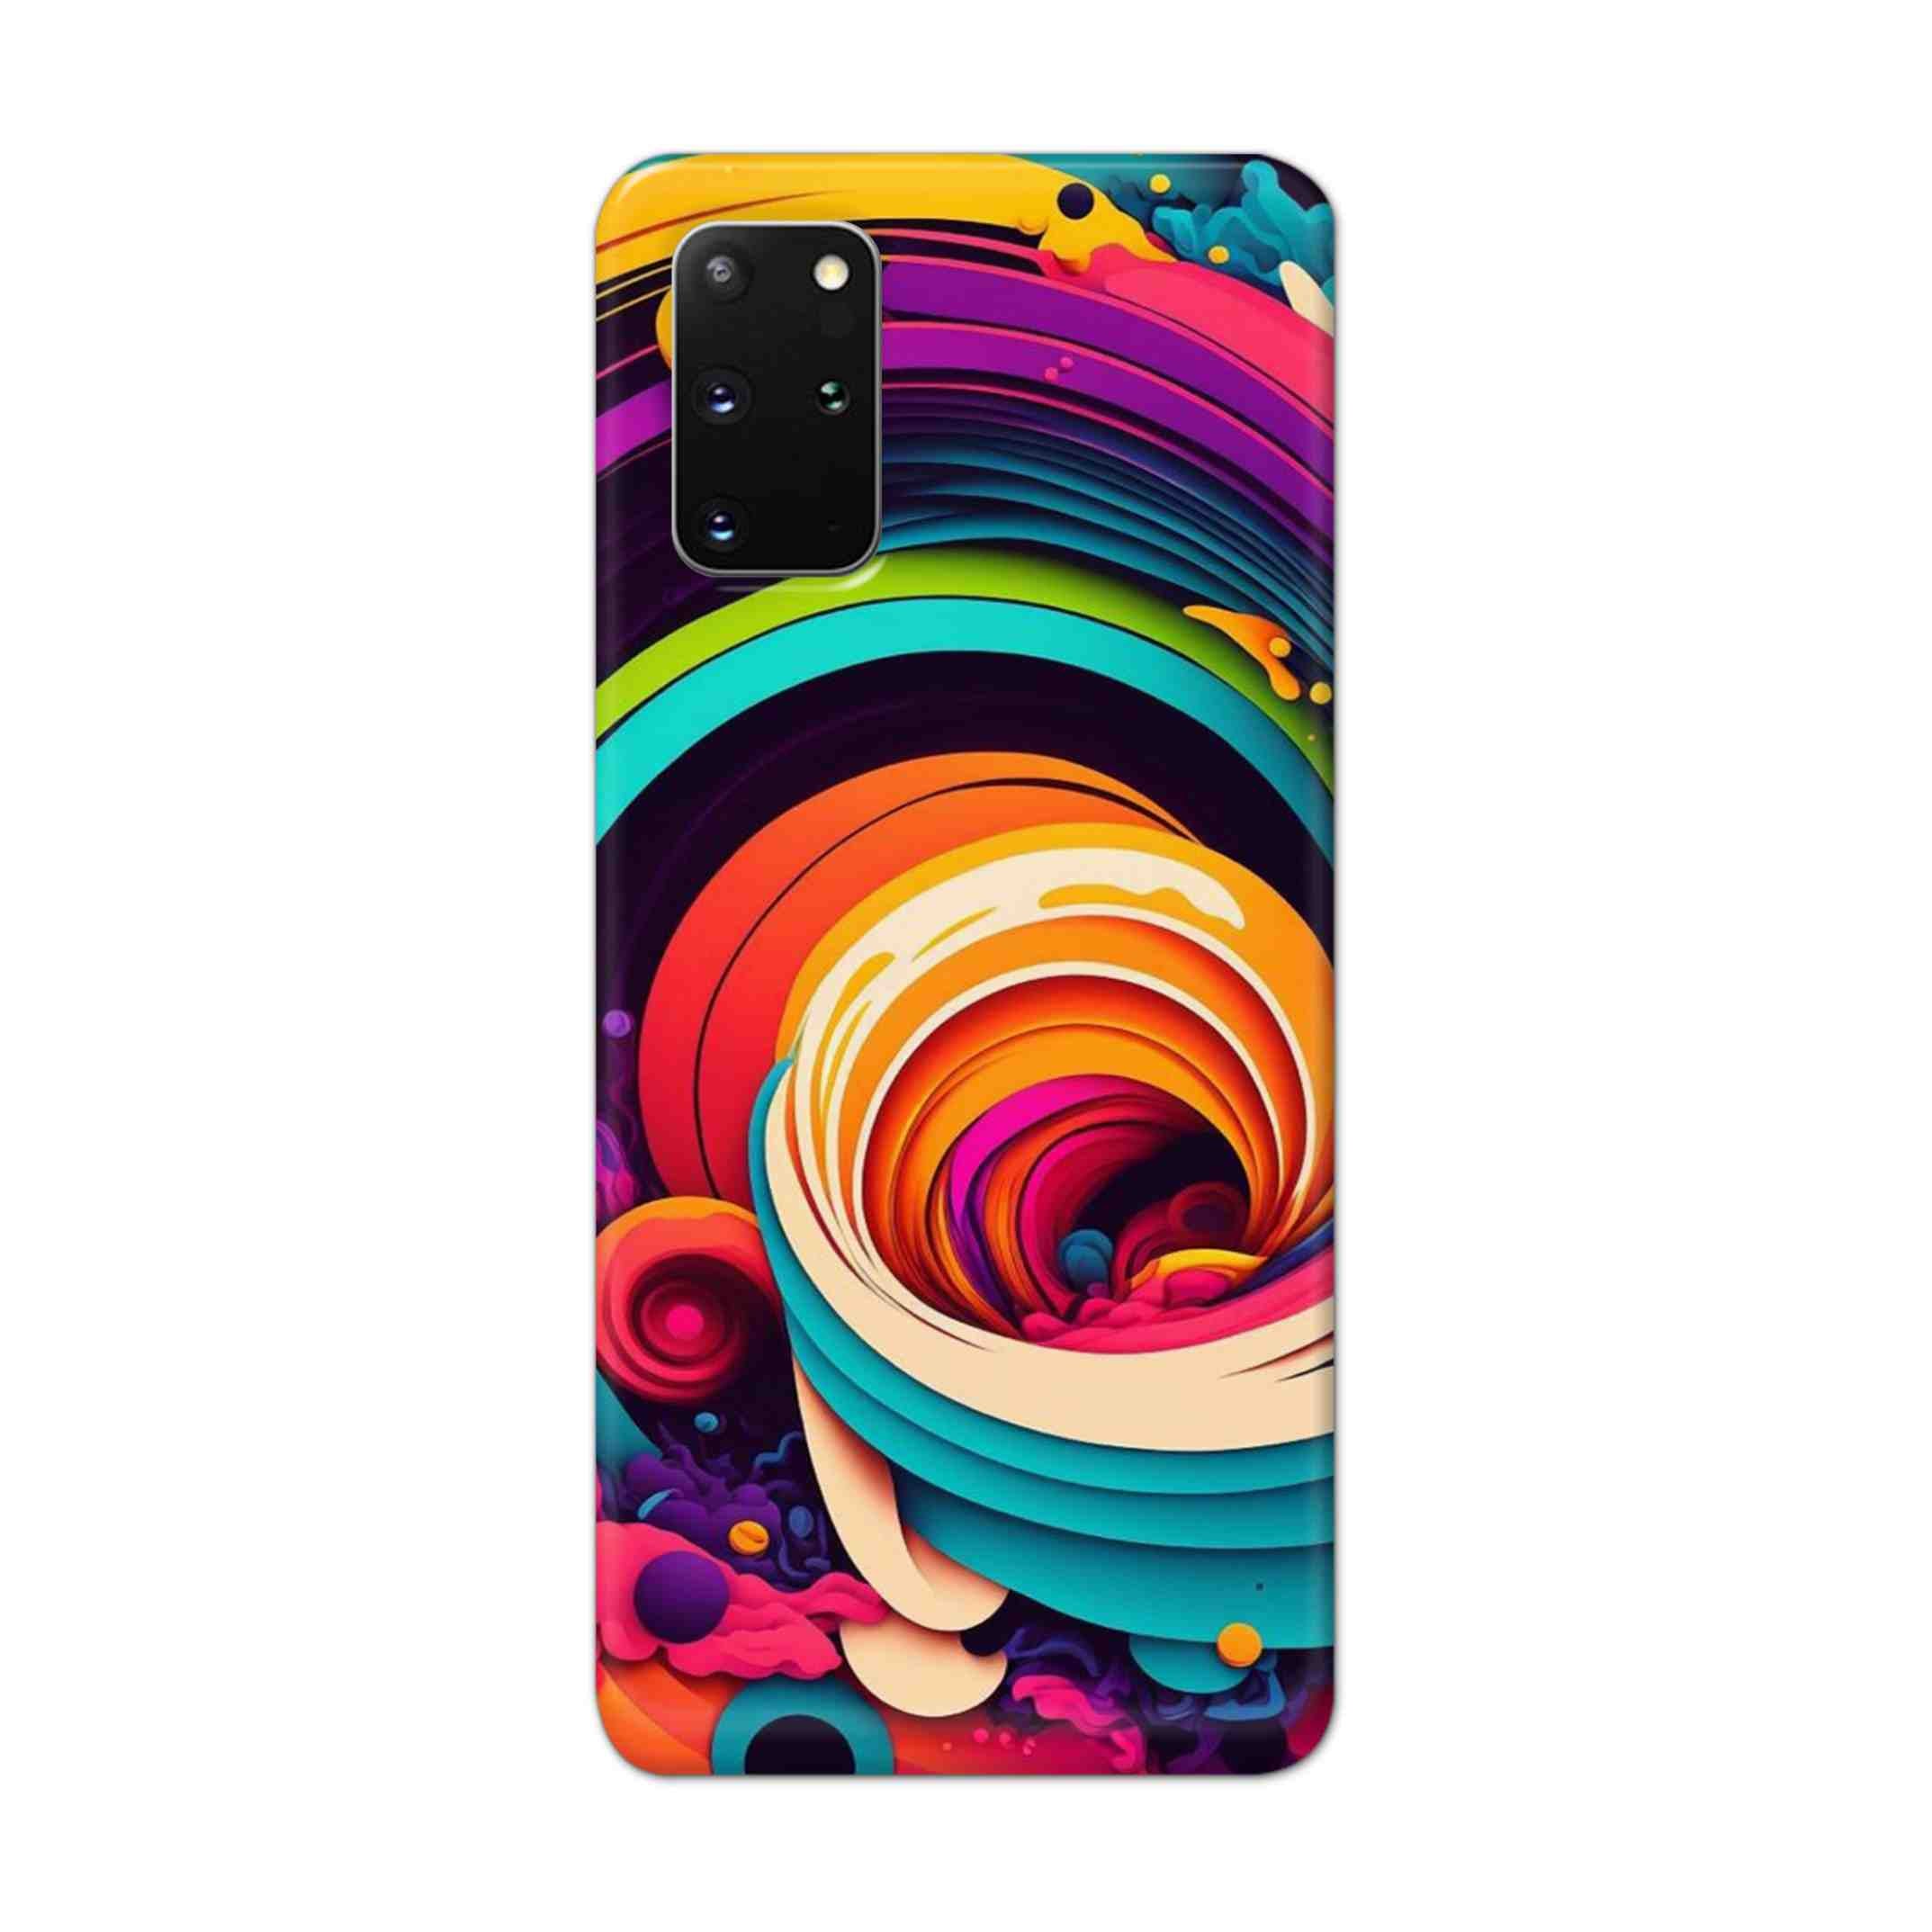 Buy Colour Circle Hard Back Mobile Phone Case Cover For Samsung Galaxy S20 Plus Online